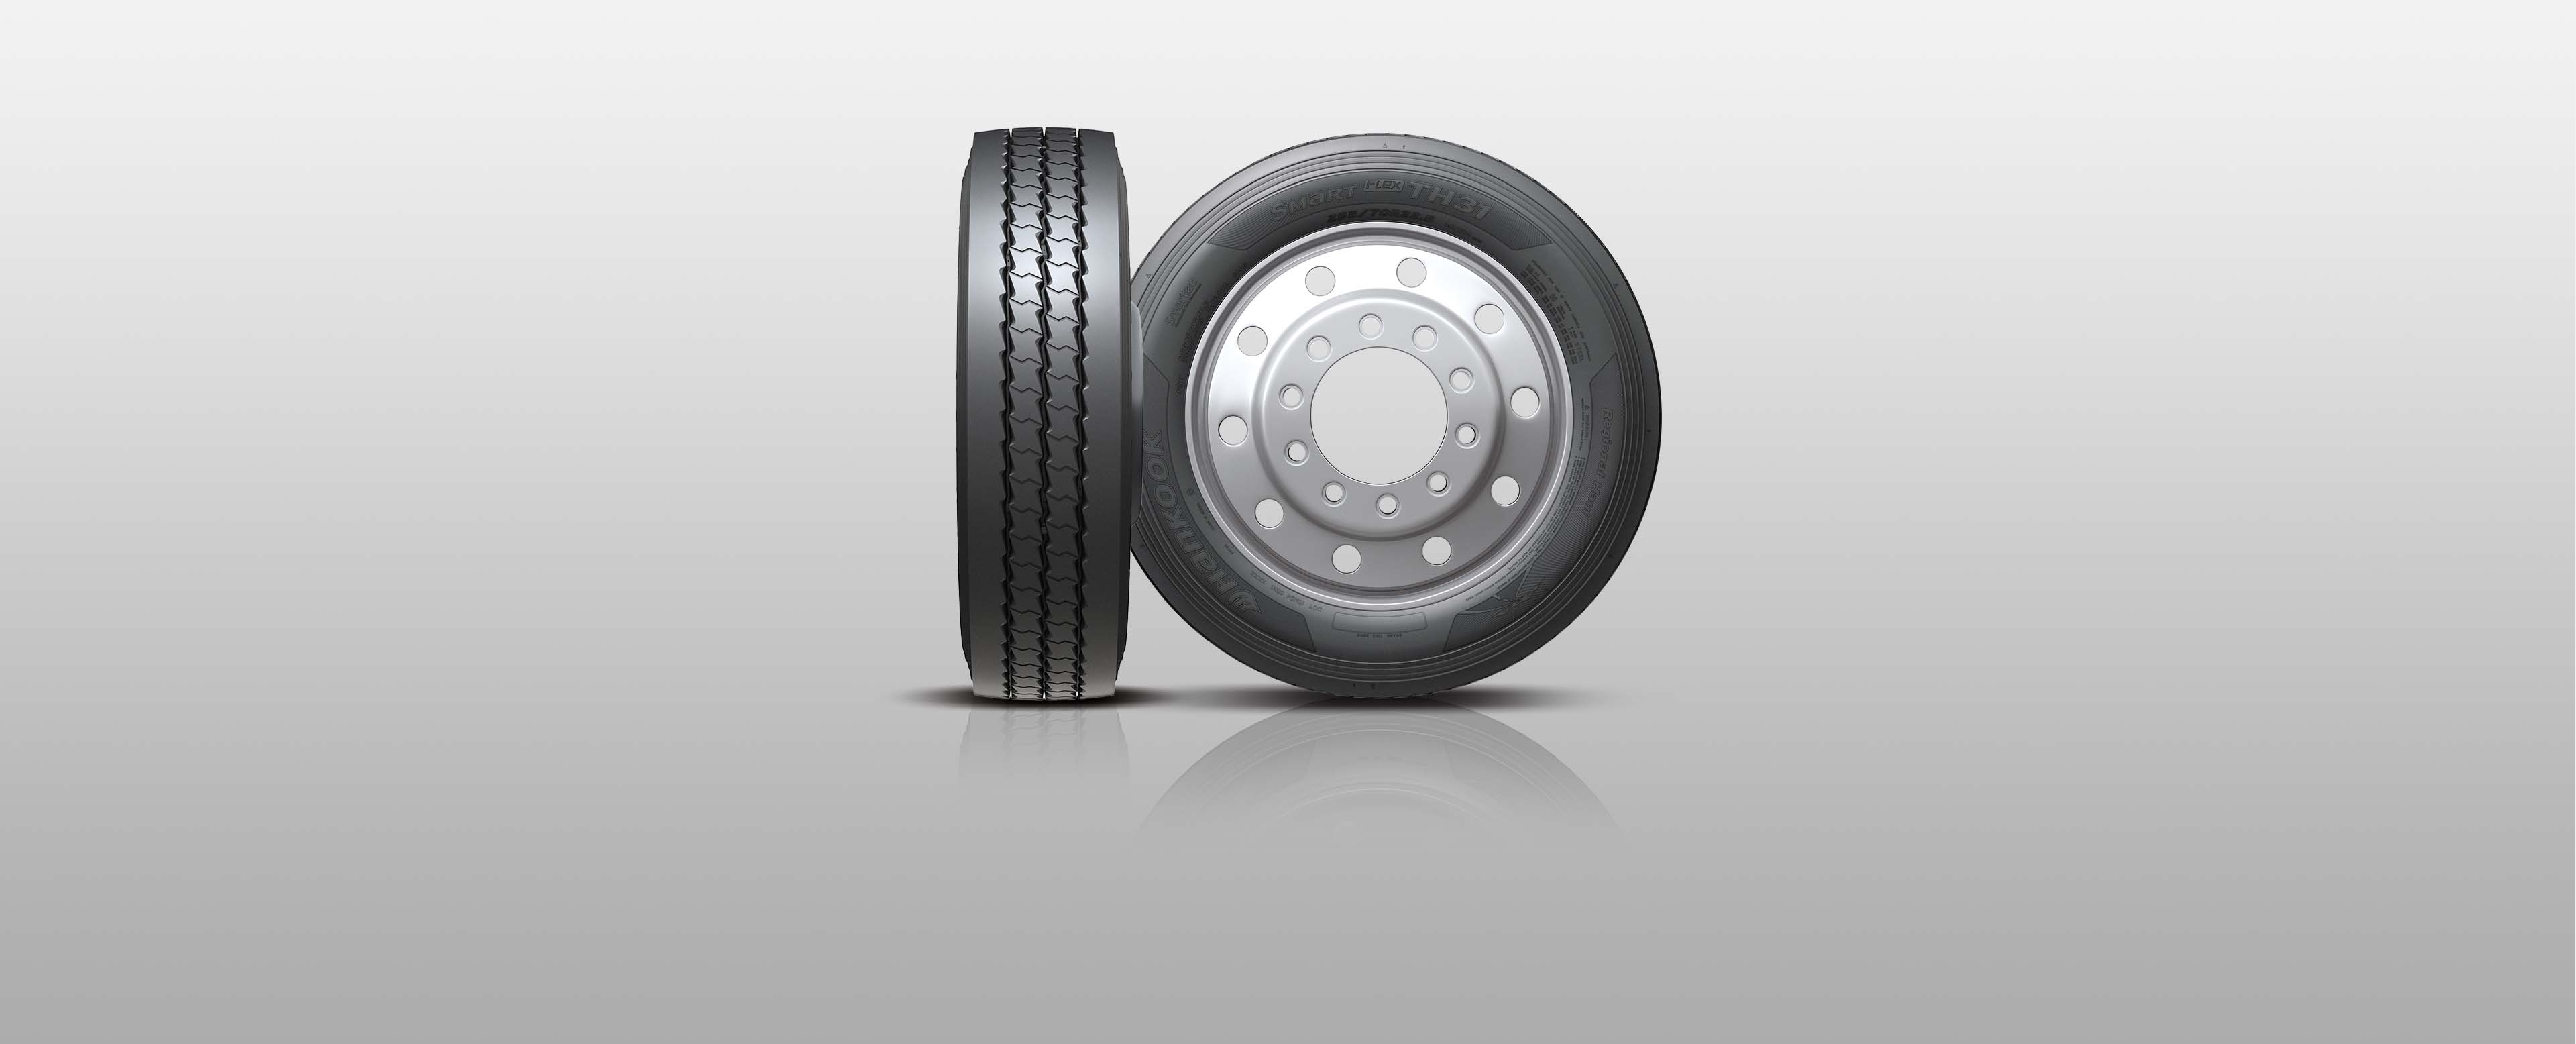 Hankook Tire & Technology-Tires-Smart-Smart Flex-TH31-All season tire for variable road conditions